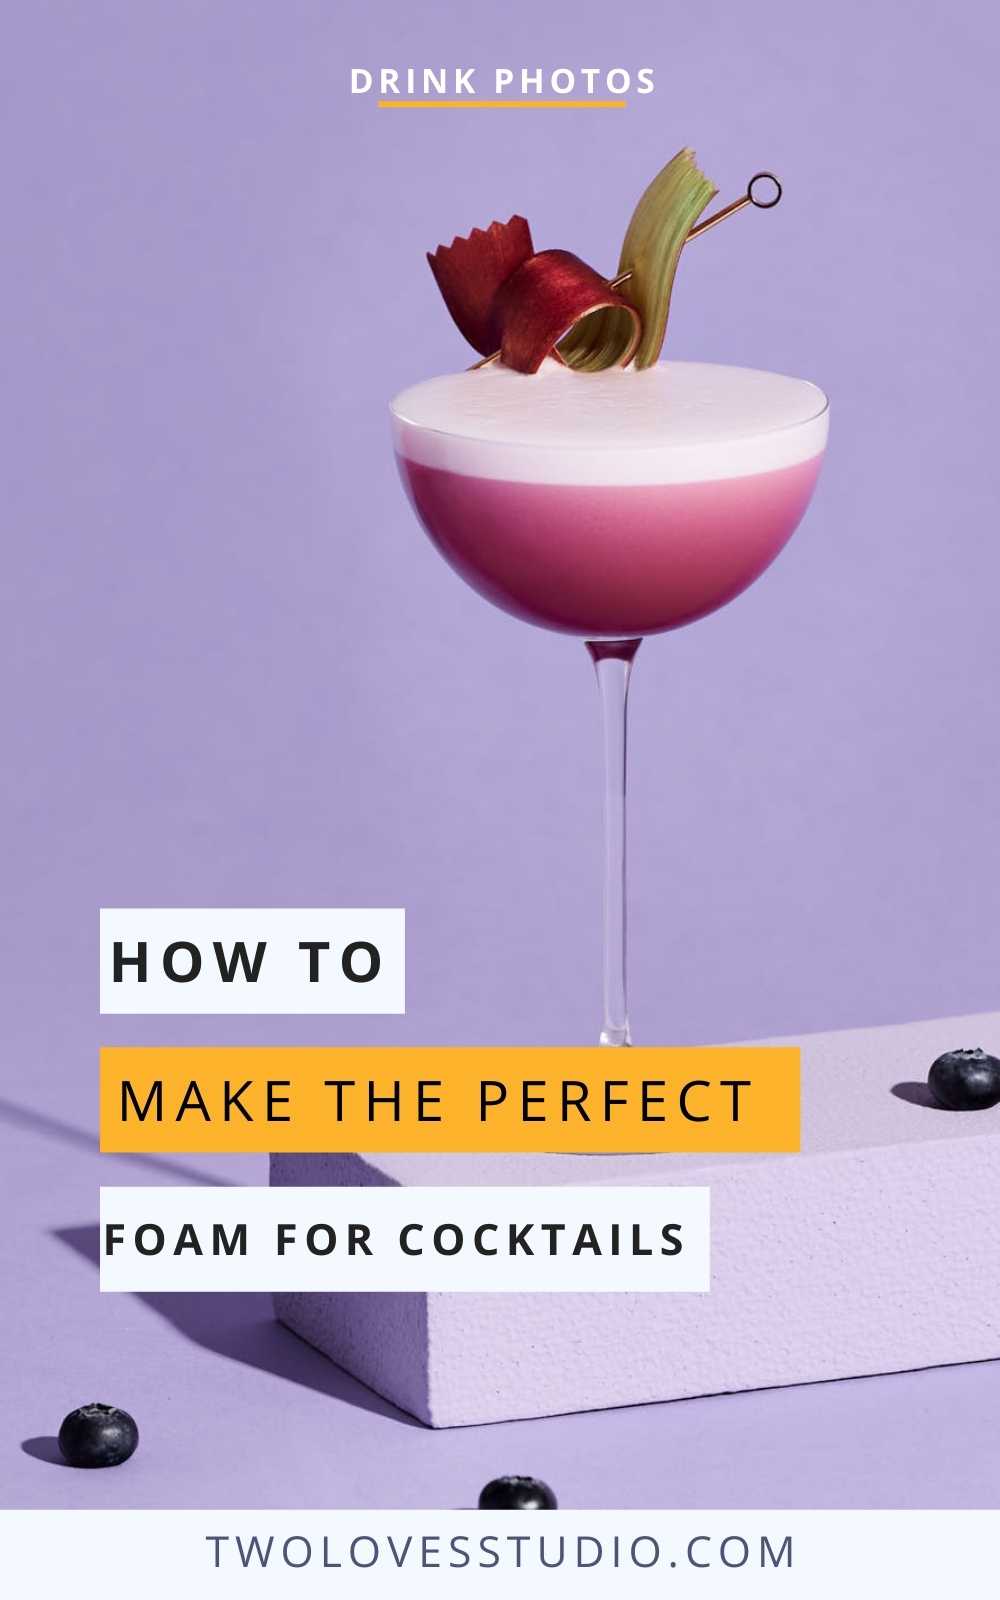 https://twolovesstudio.com/wp-content/uploads/2021/06/Dry-Shake-Cocktail-Technique-How-to-Make-the-Perfect-Foam-For-Cocktails_5.jpg